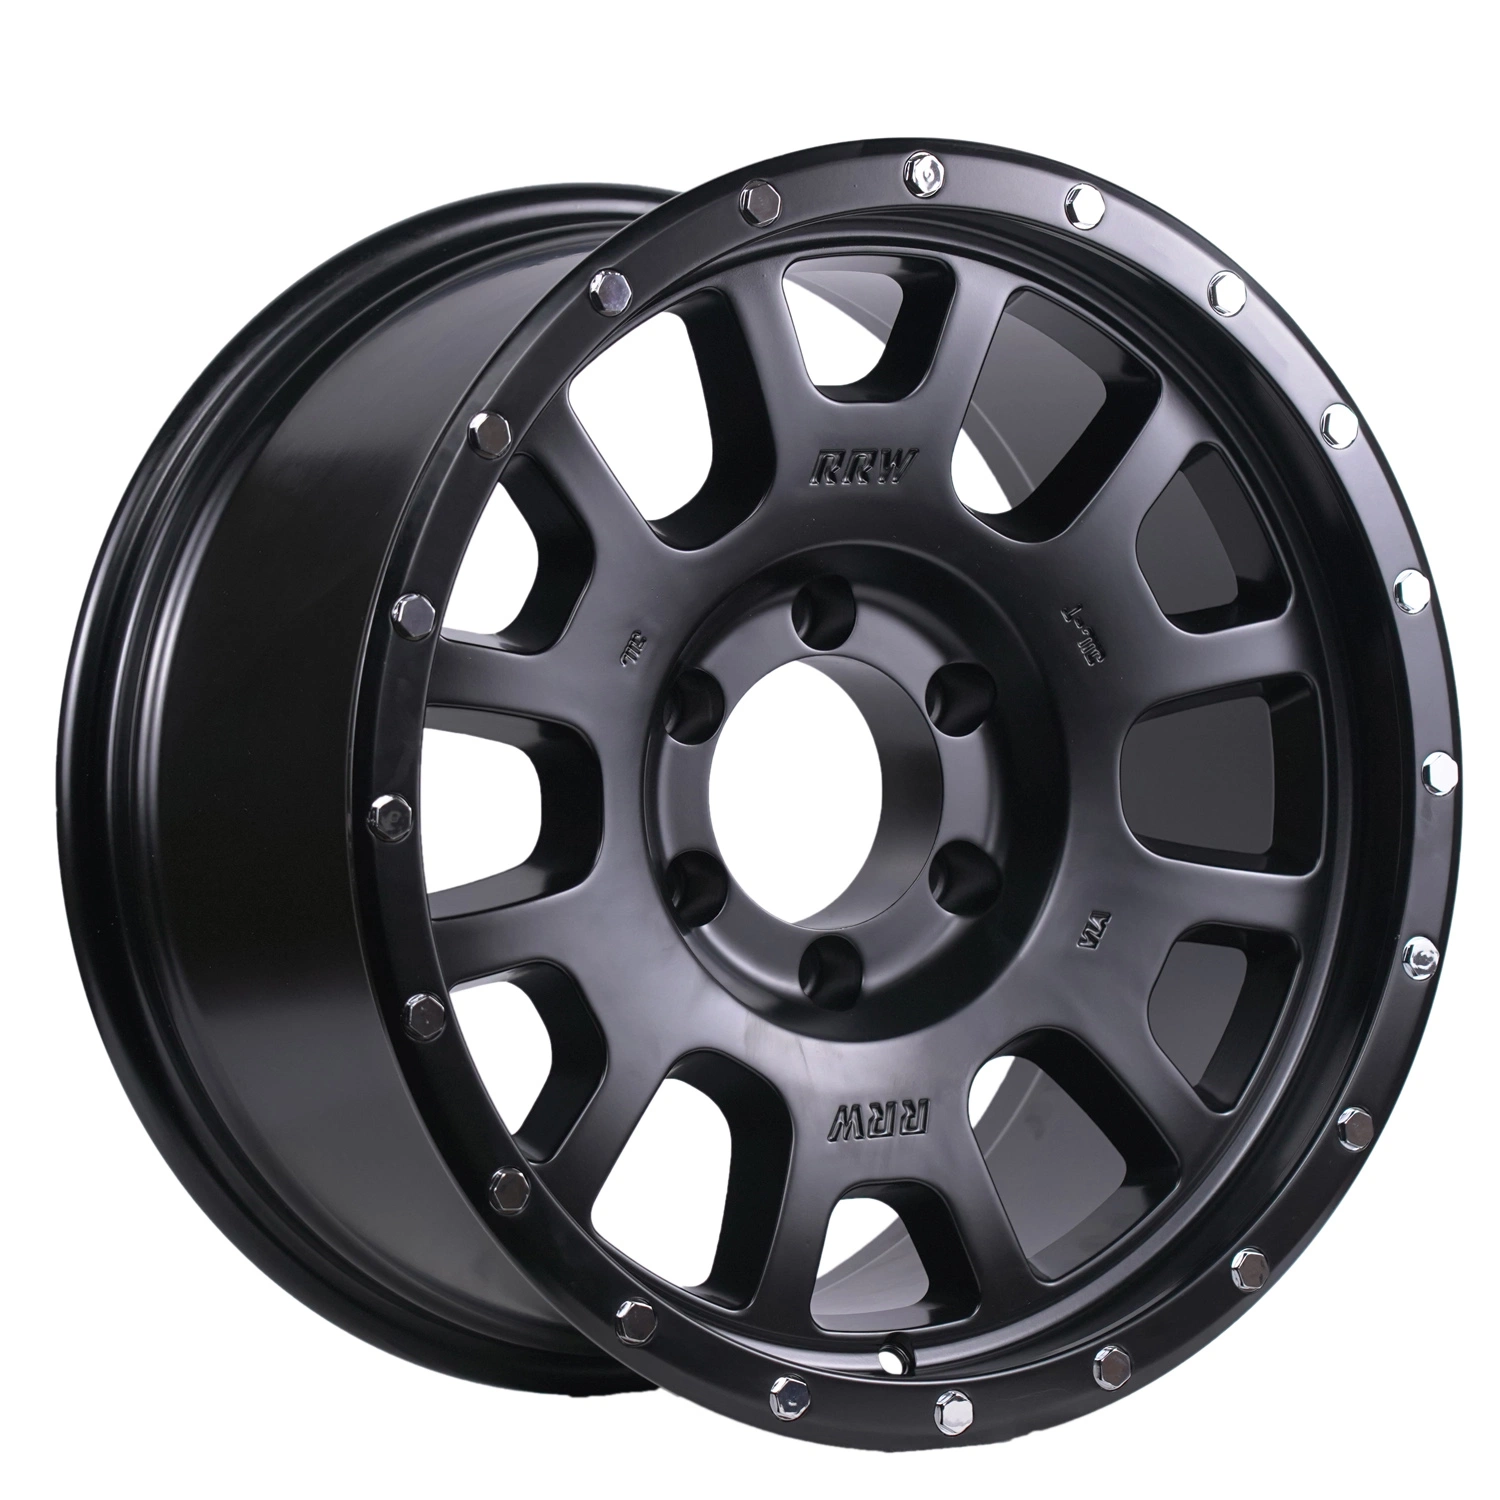 High Strength Rines 18X9 5 Hole Rims 6 Hole 8 Hole off-Road off Road Tires 4X4 Wheels